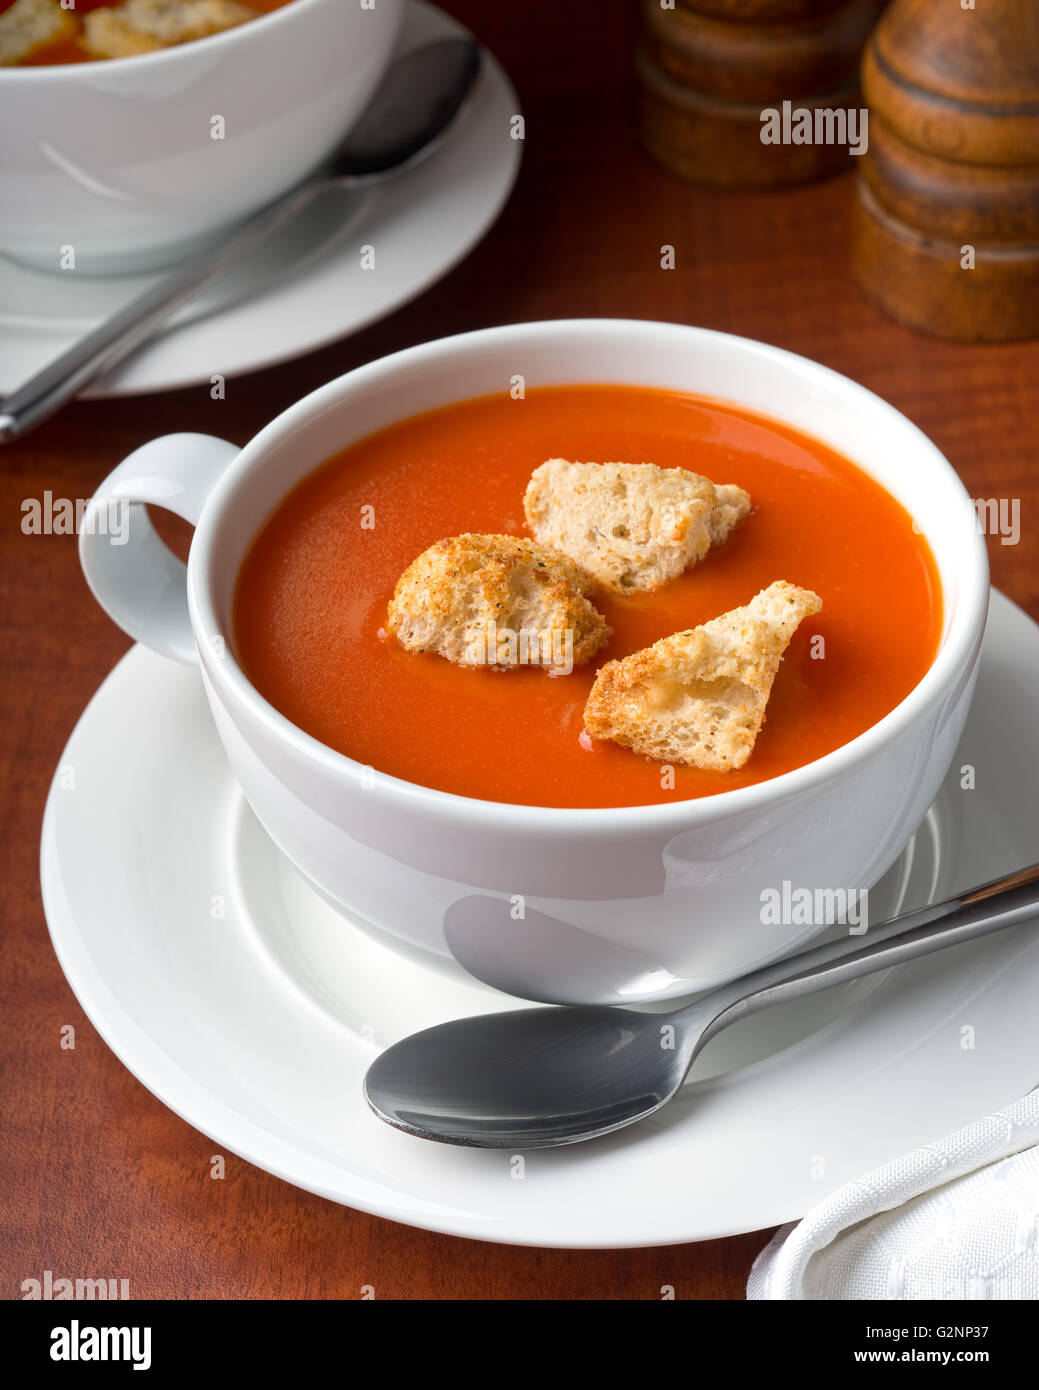 A bowl of delicious tomato soup with home made croutons. Stock Photo